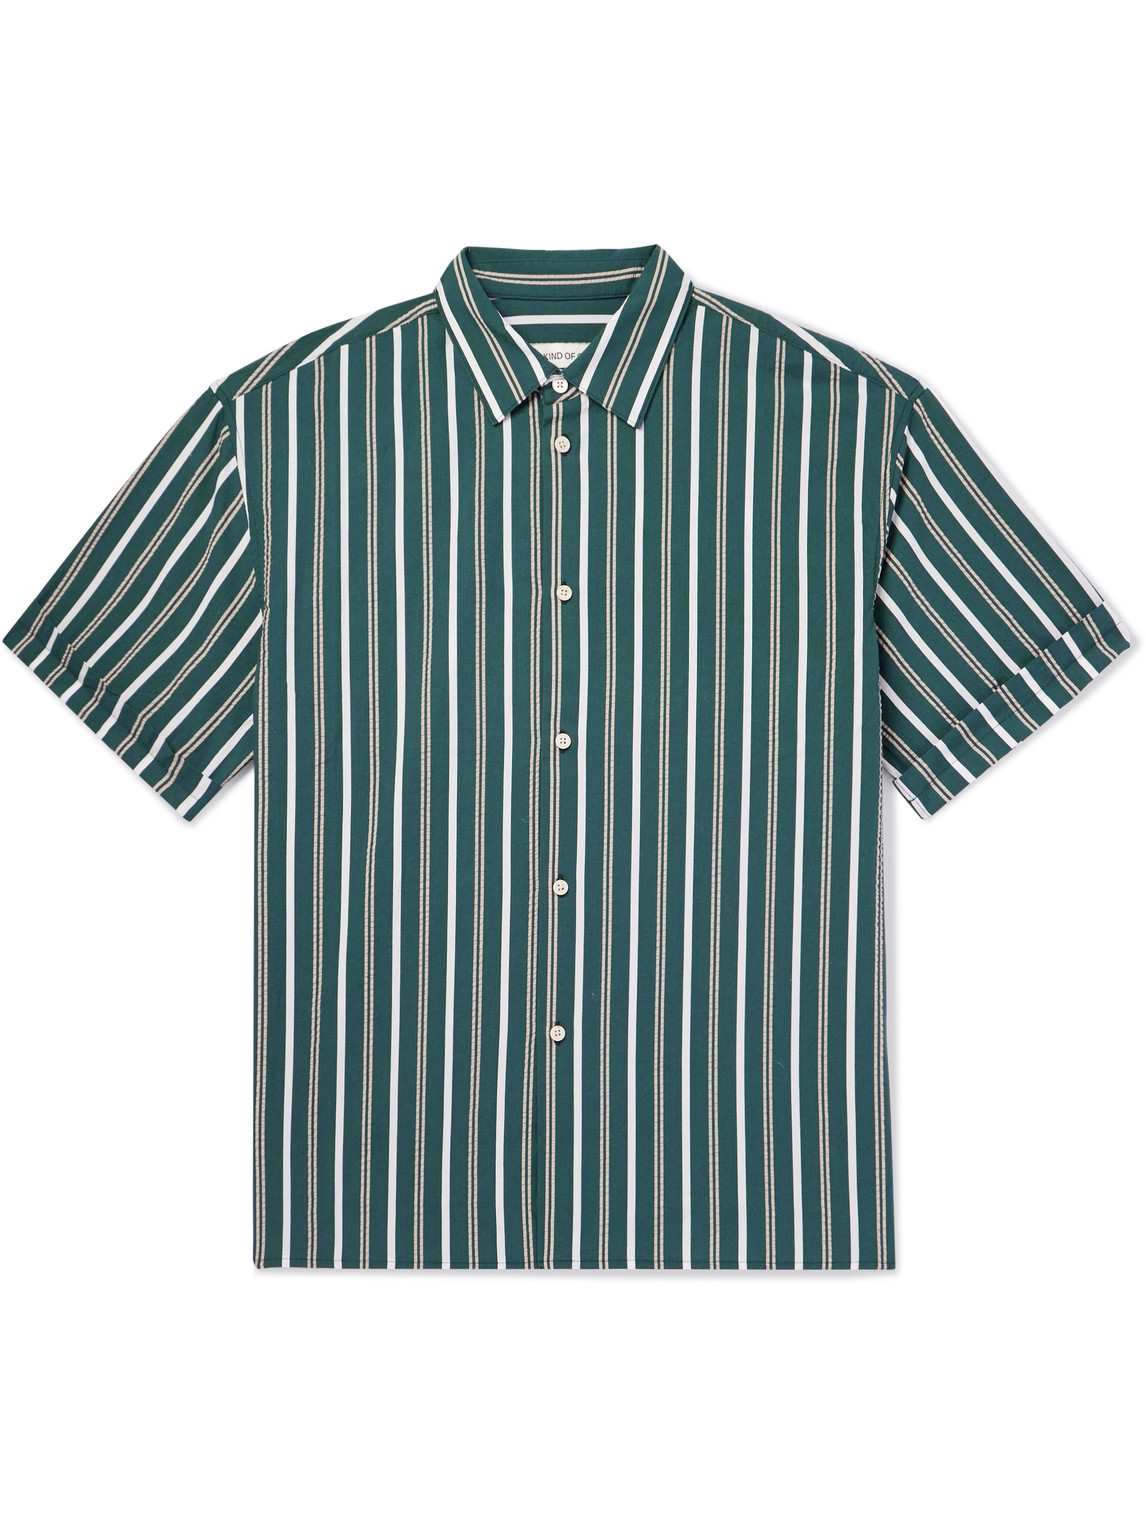 A Kind Of Guise - Elio Striped Textured-Cotton Shirt - Men - Green - L von A Kind Of Guise